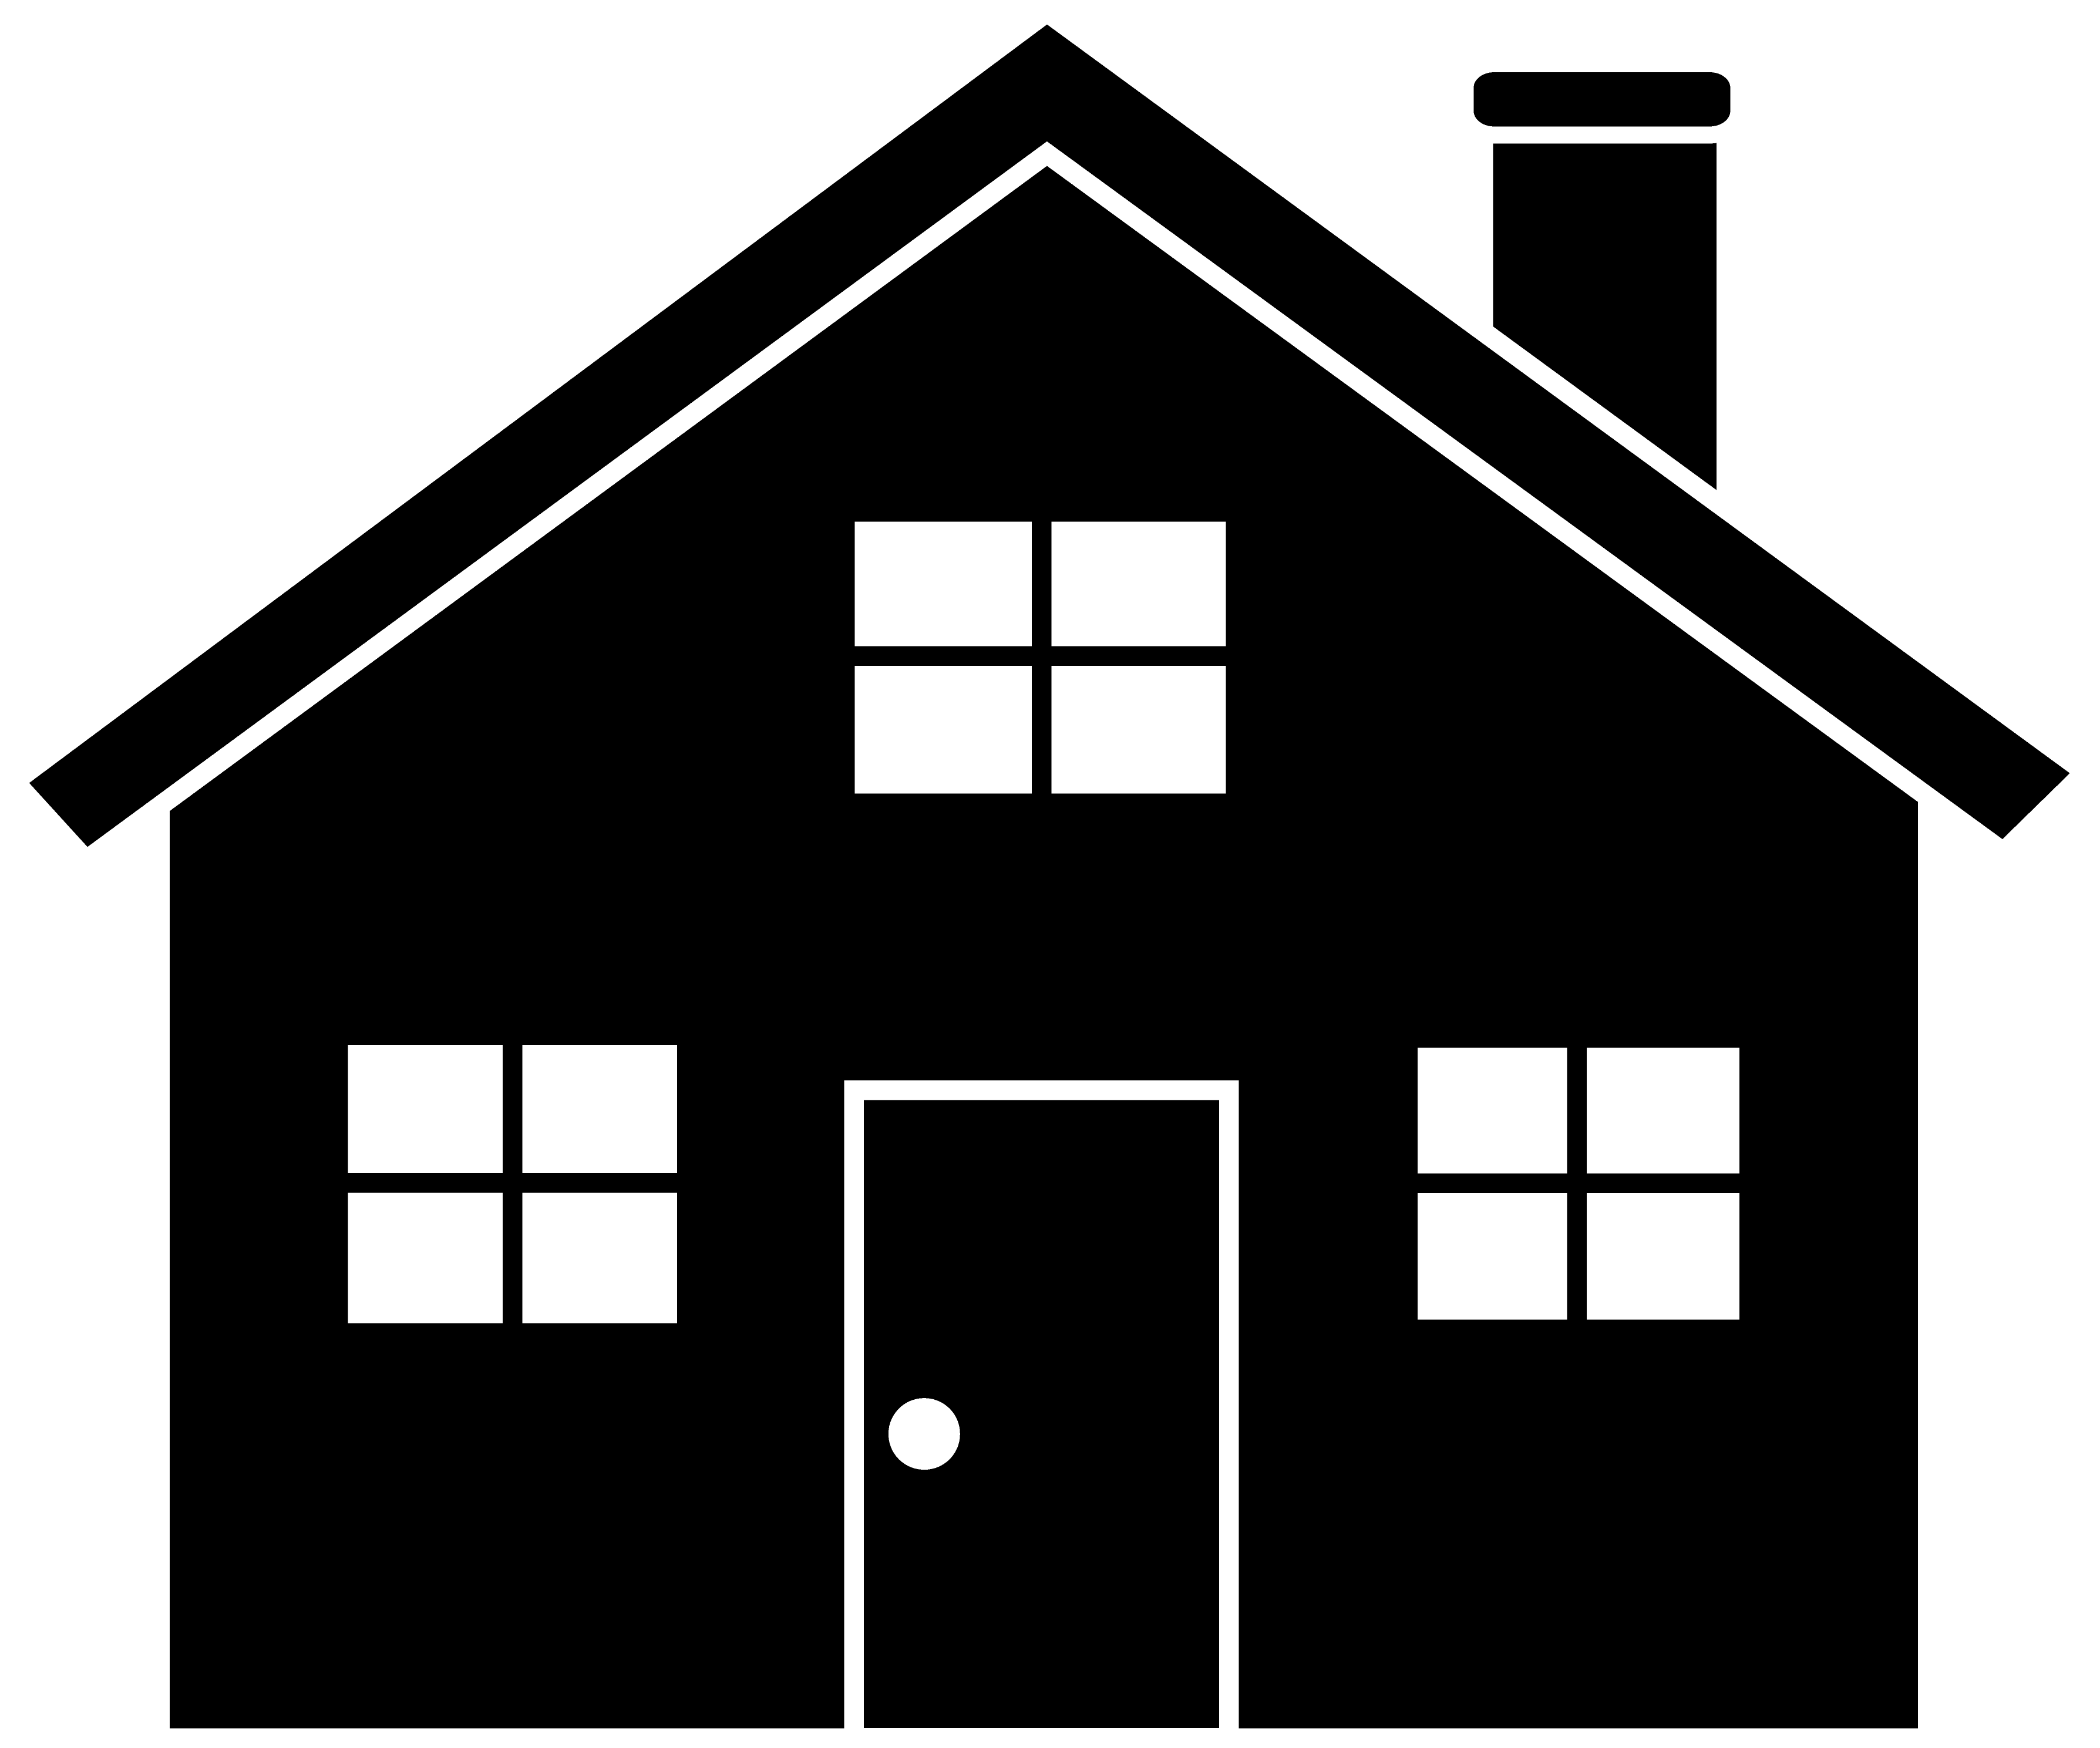 Hands clipart house. Image of black background